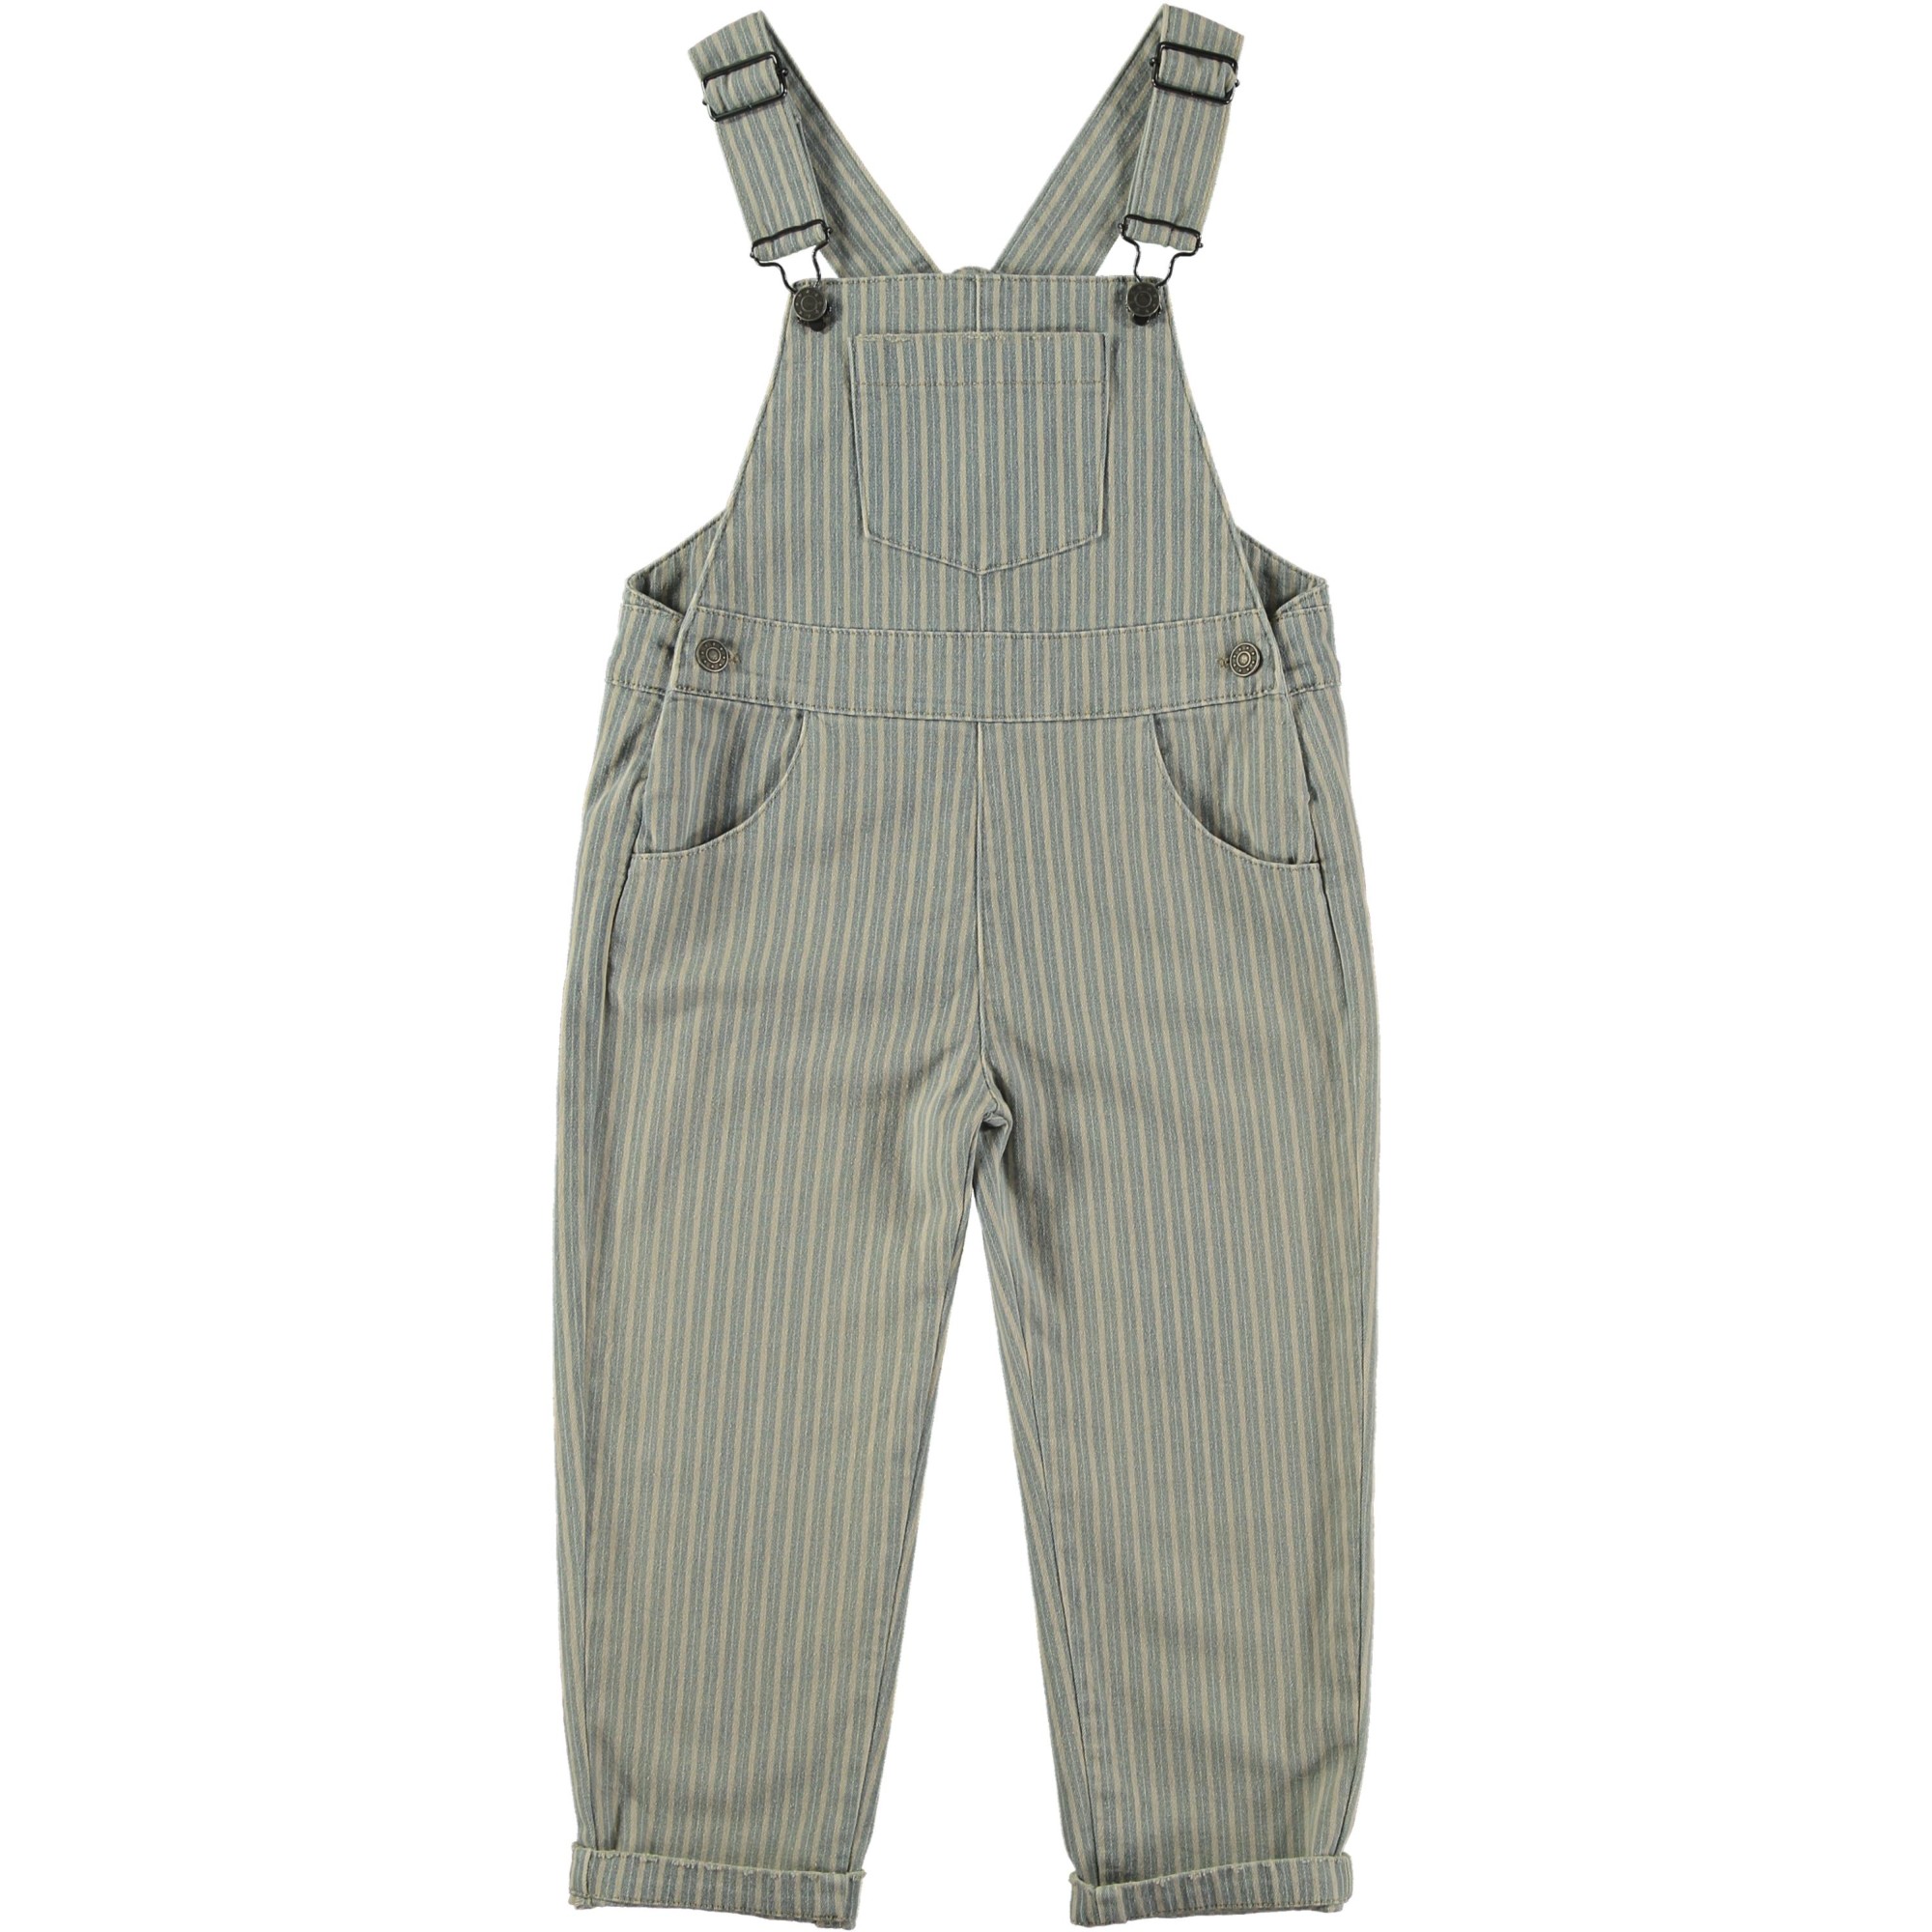 STRIPED JEANS OVERALL 1